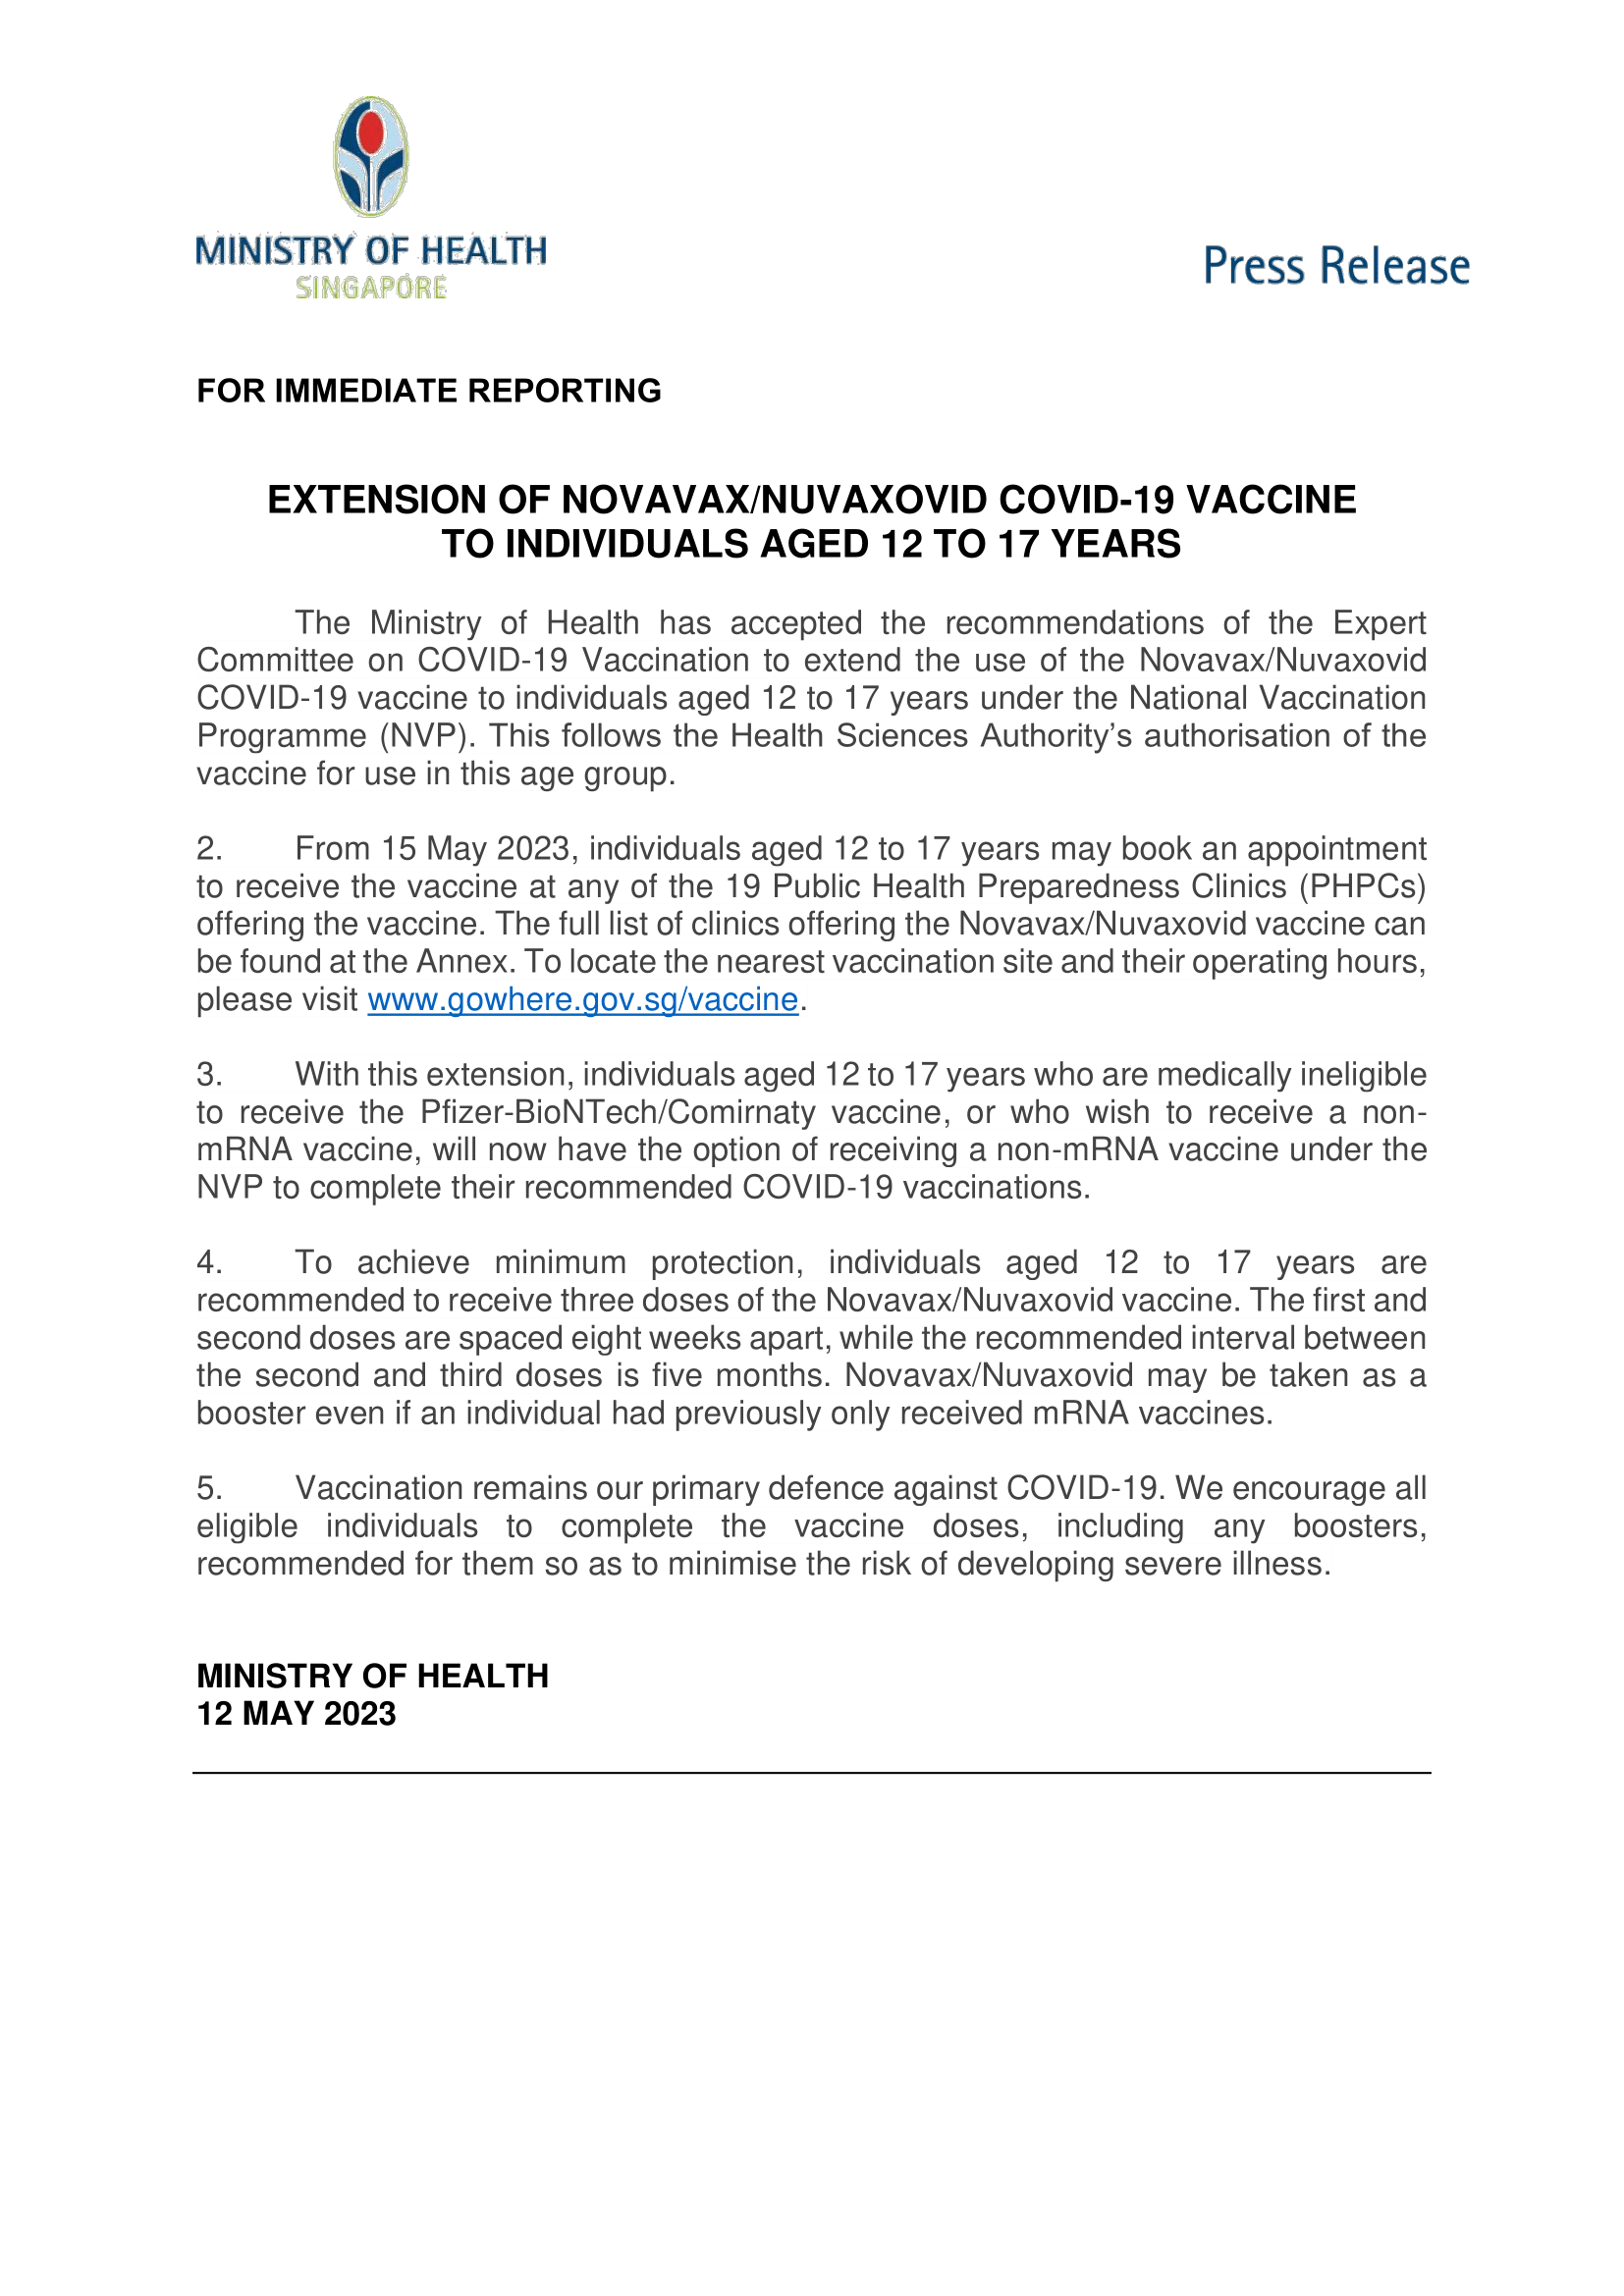 [MOH Connected] Press Release - Extension of NovavaxNuvaxovid vaccine to individuals aged 12 to 17 years-1.png